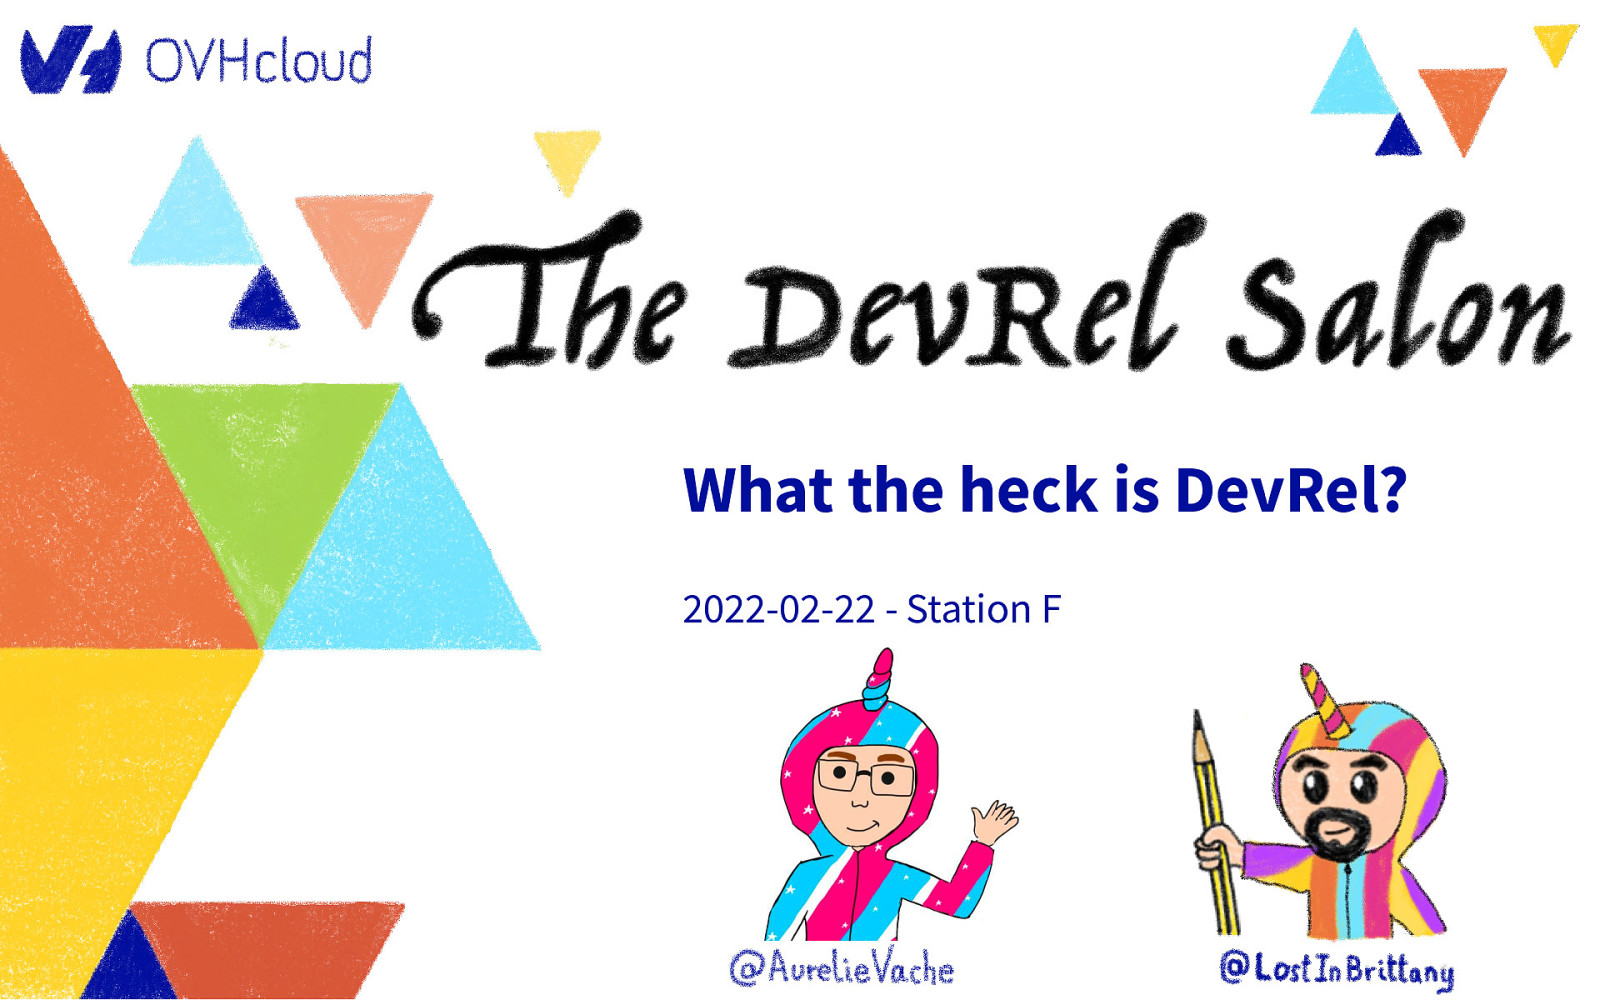 What the heck is DevRel?